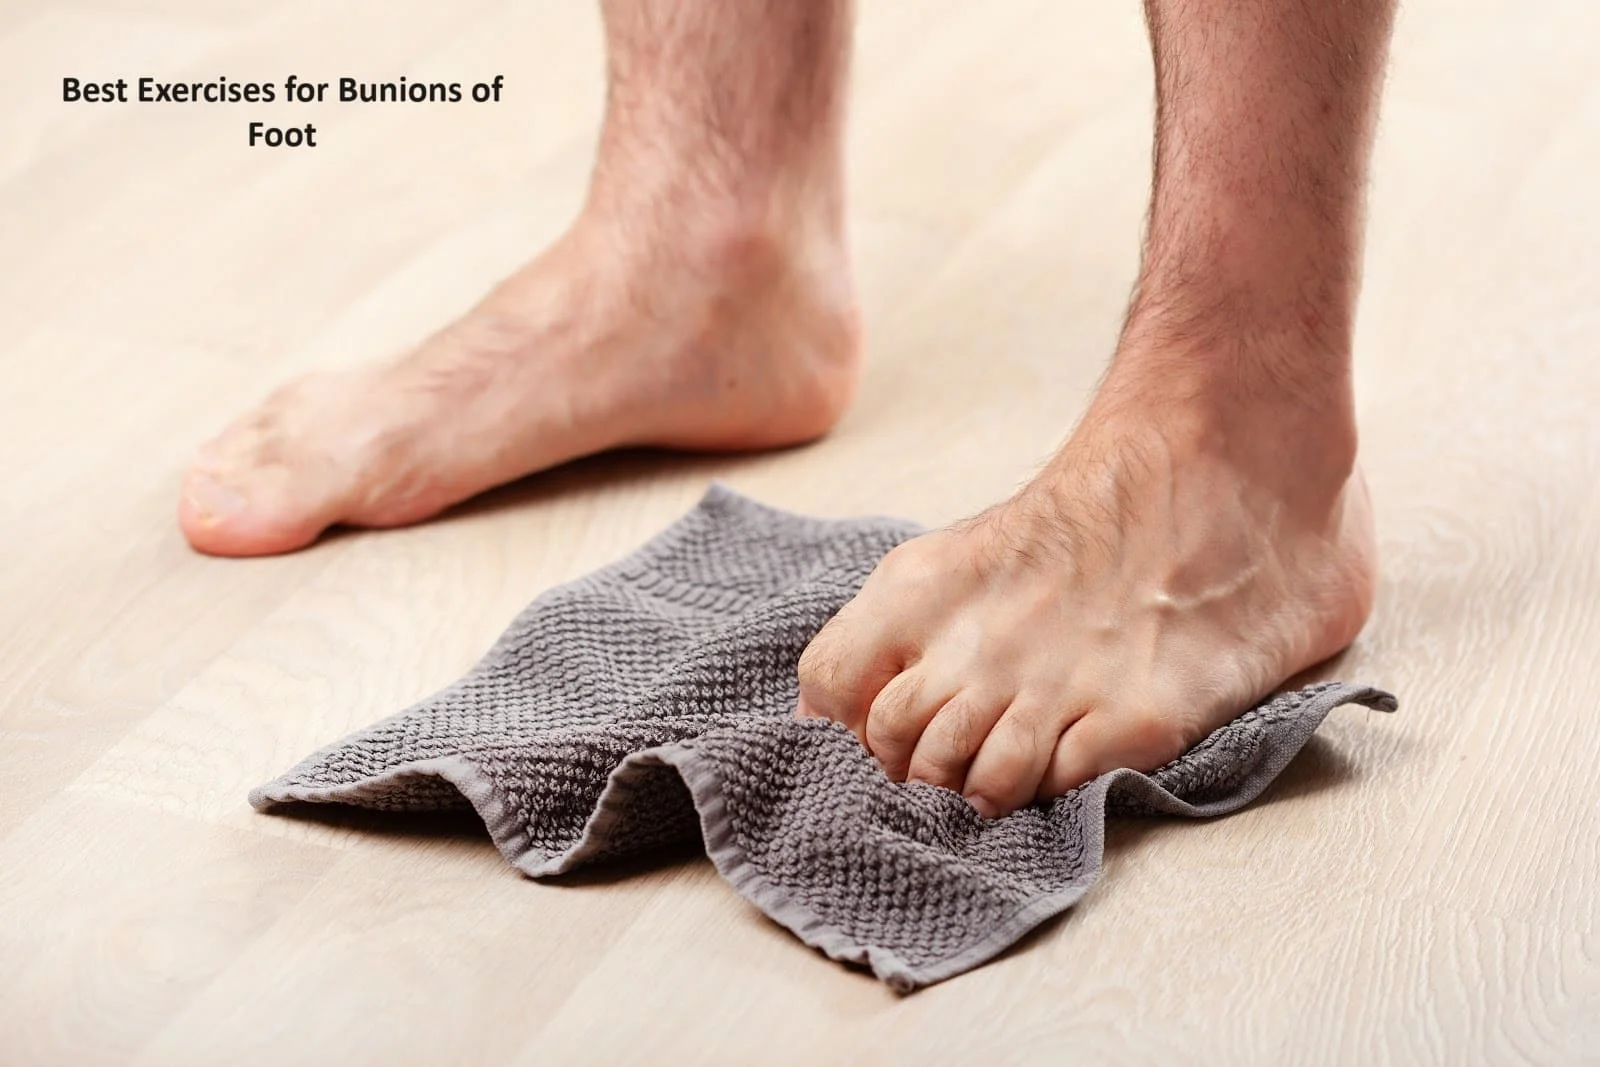 Exercises for Bunions